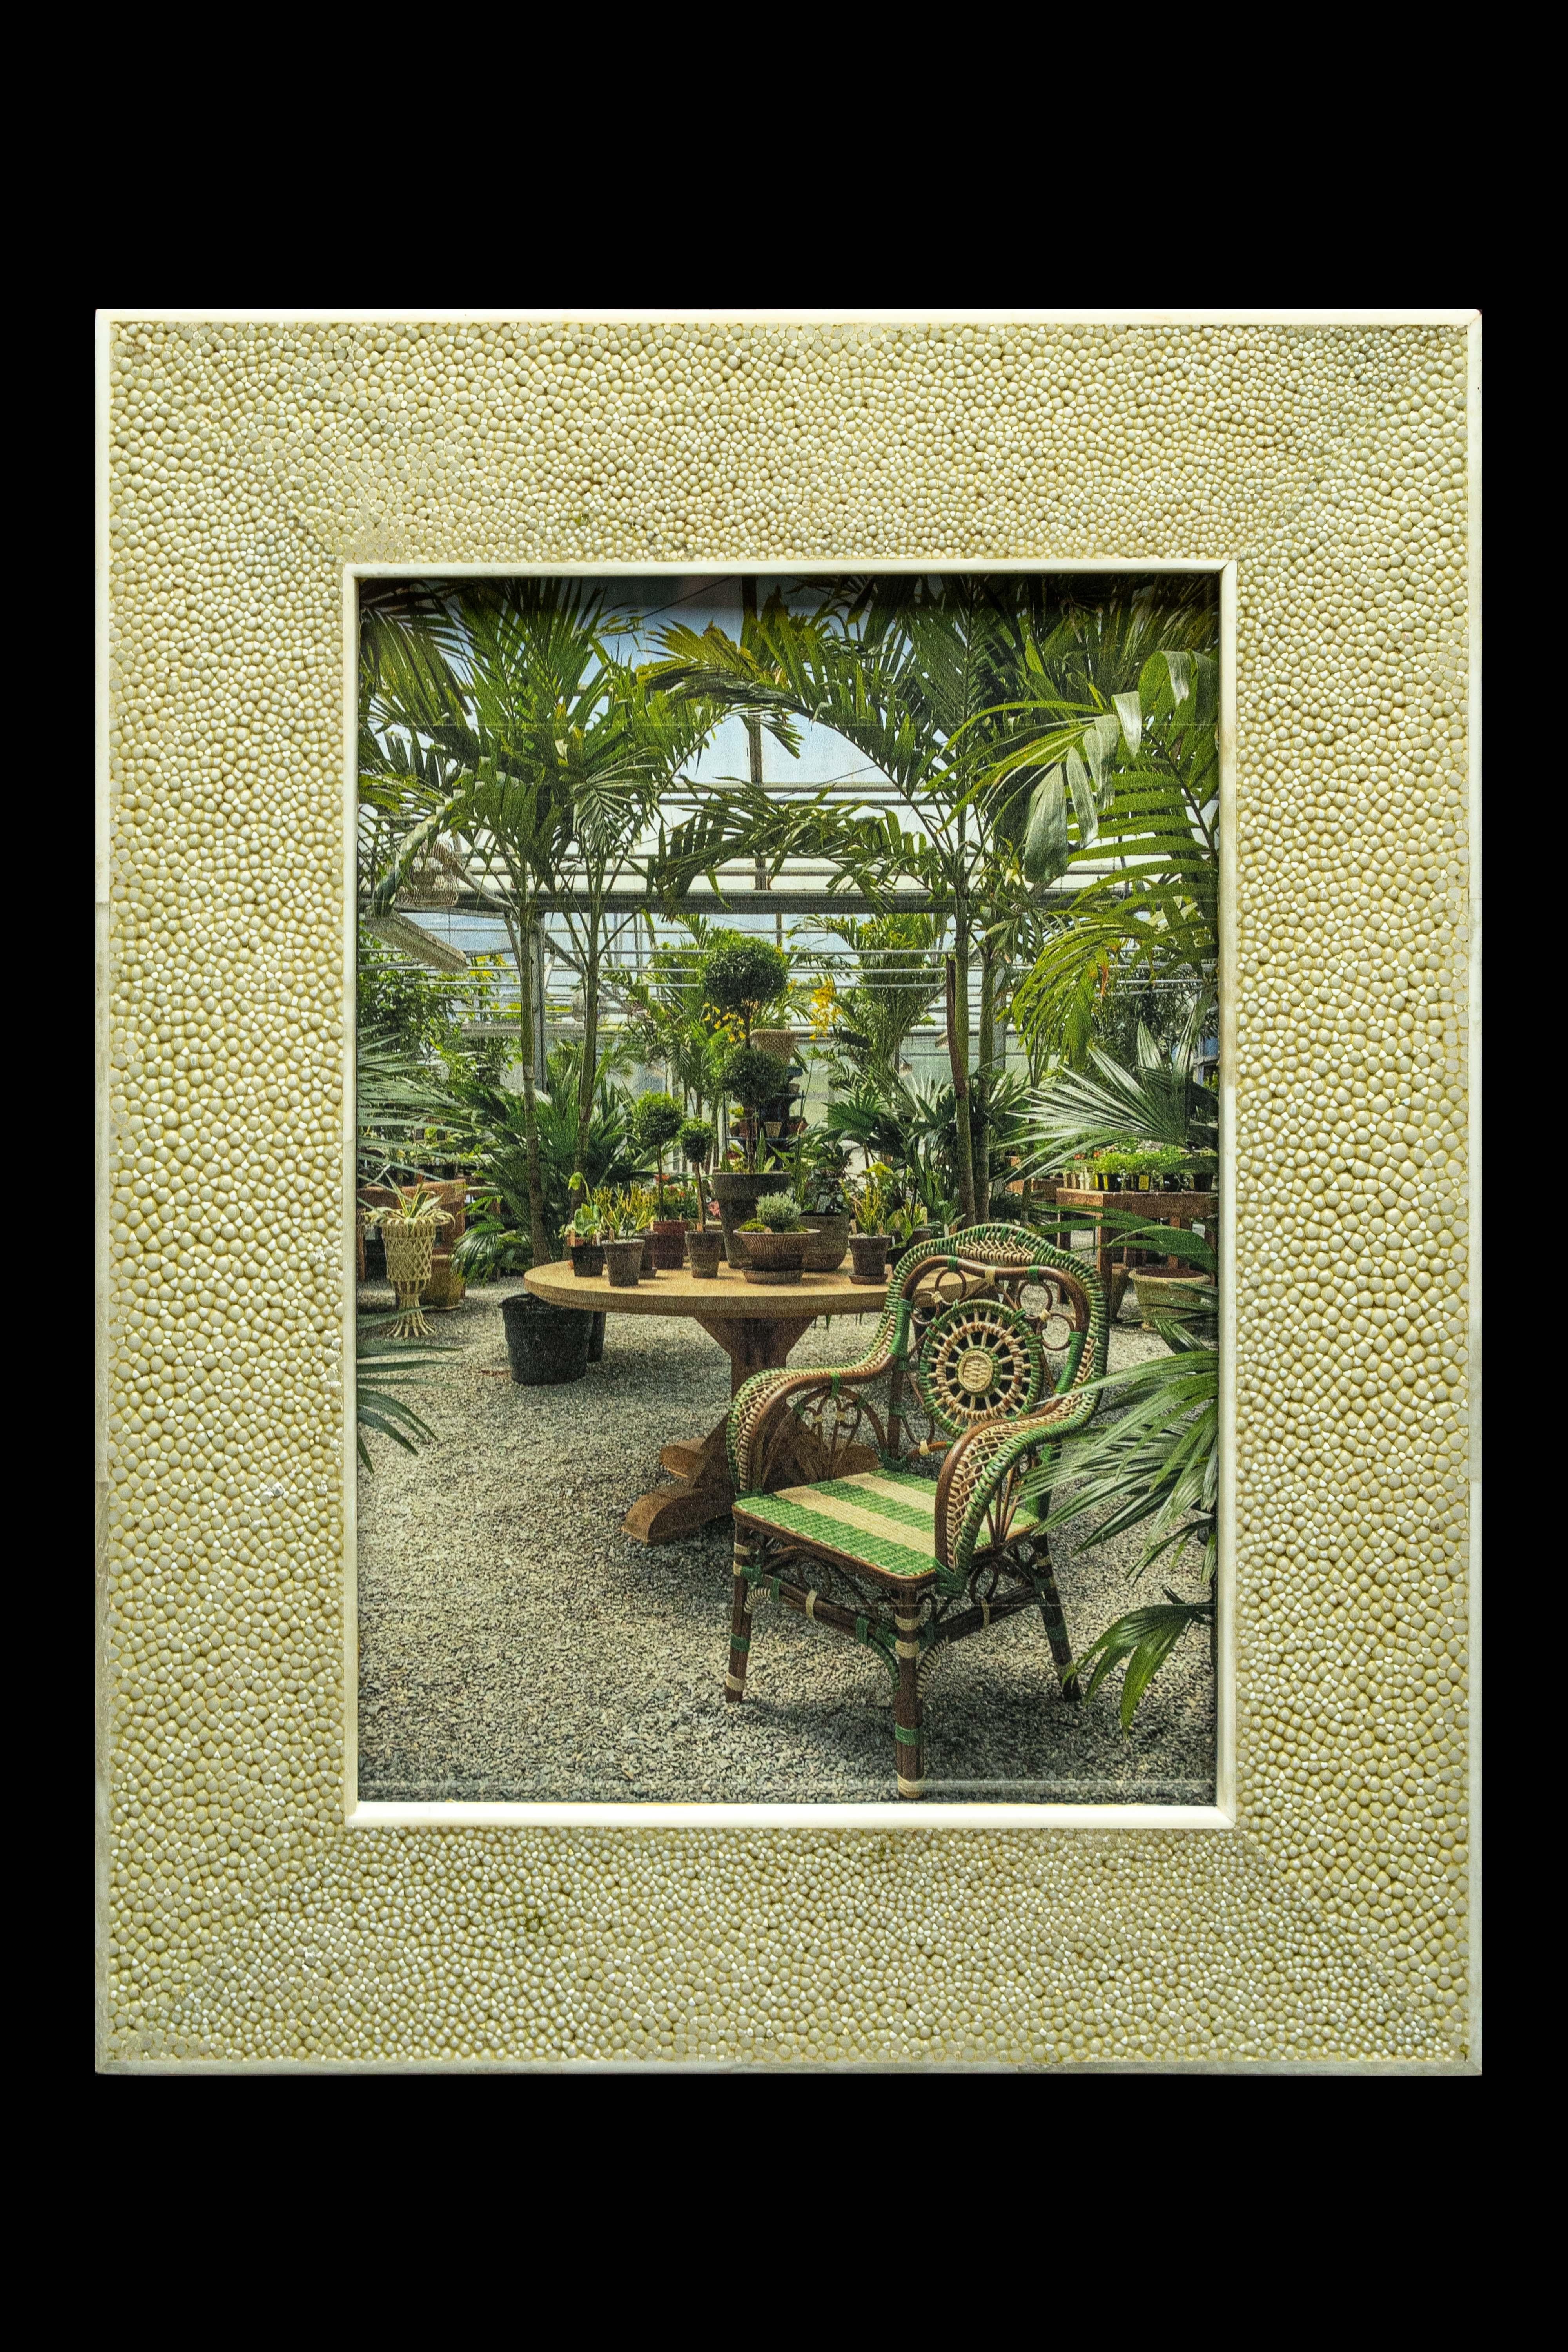 Natural Cream Shagreen frame

Measures Approximately: 9